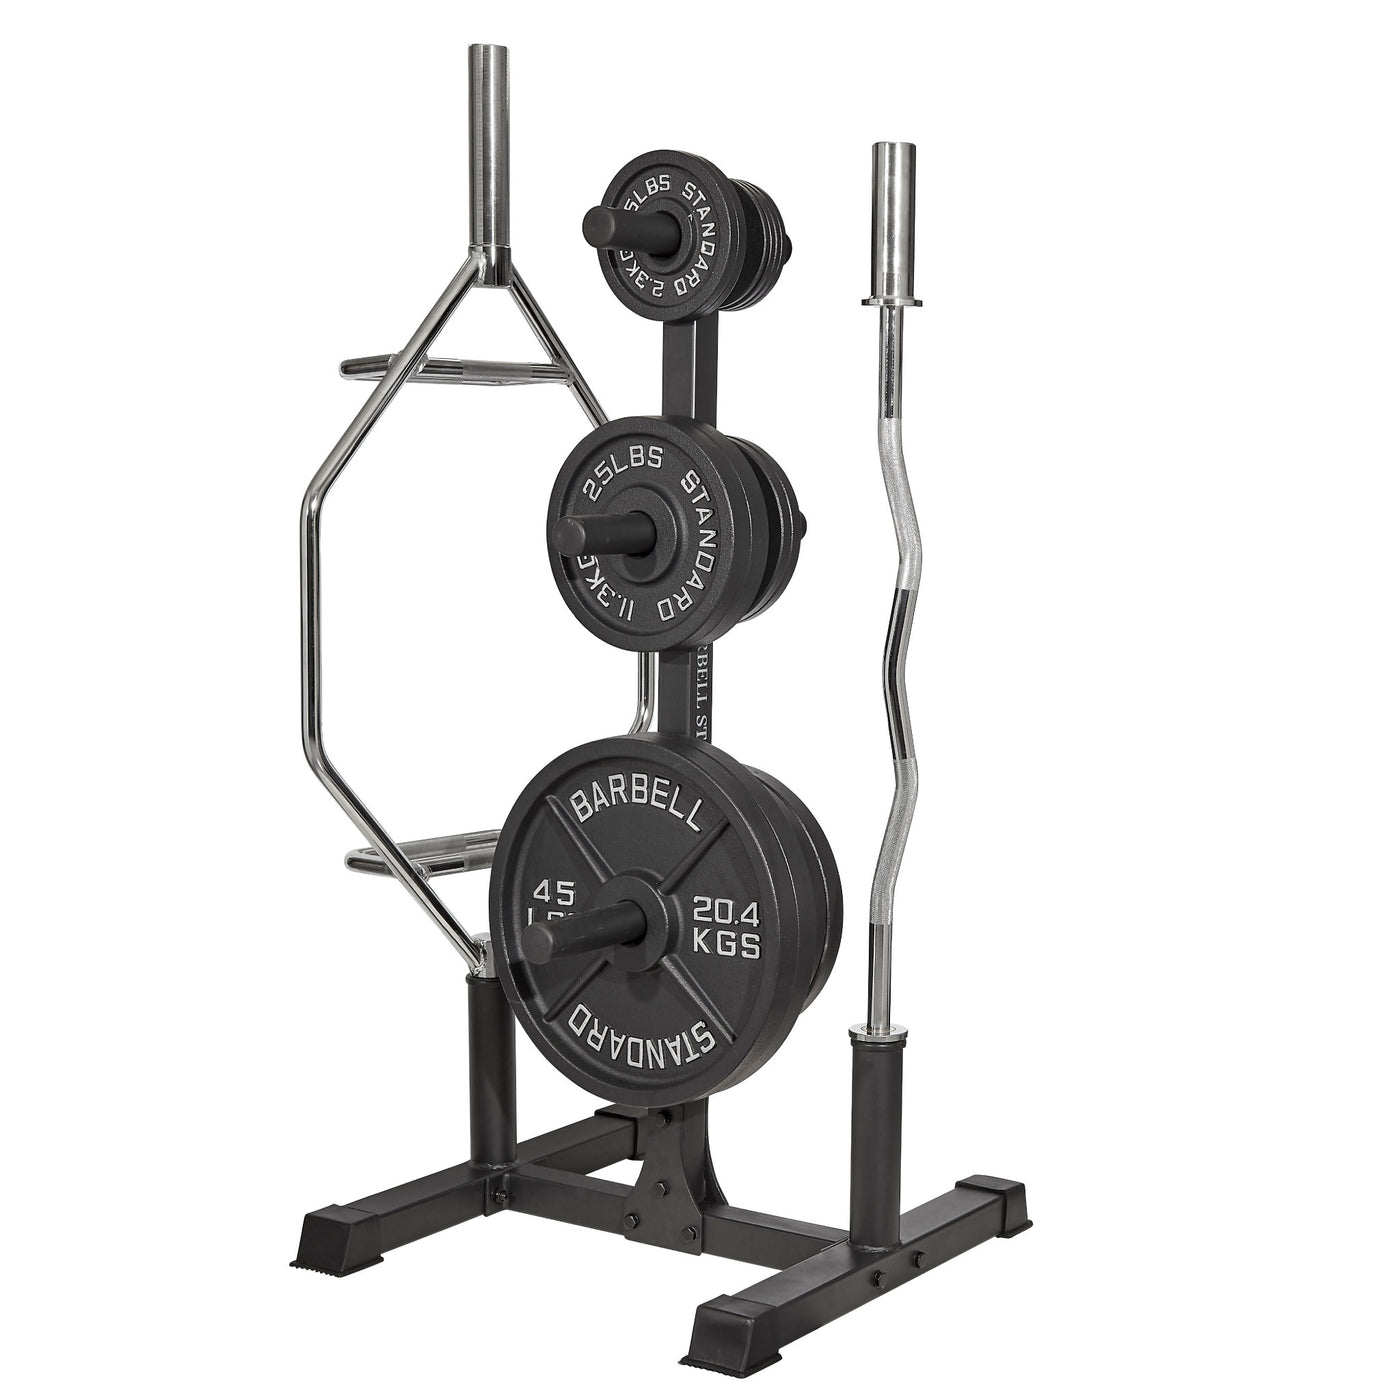 Weight Plate Tree and Bar Storage